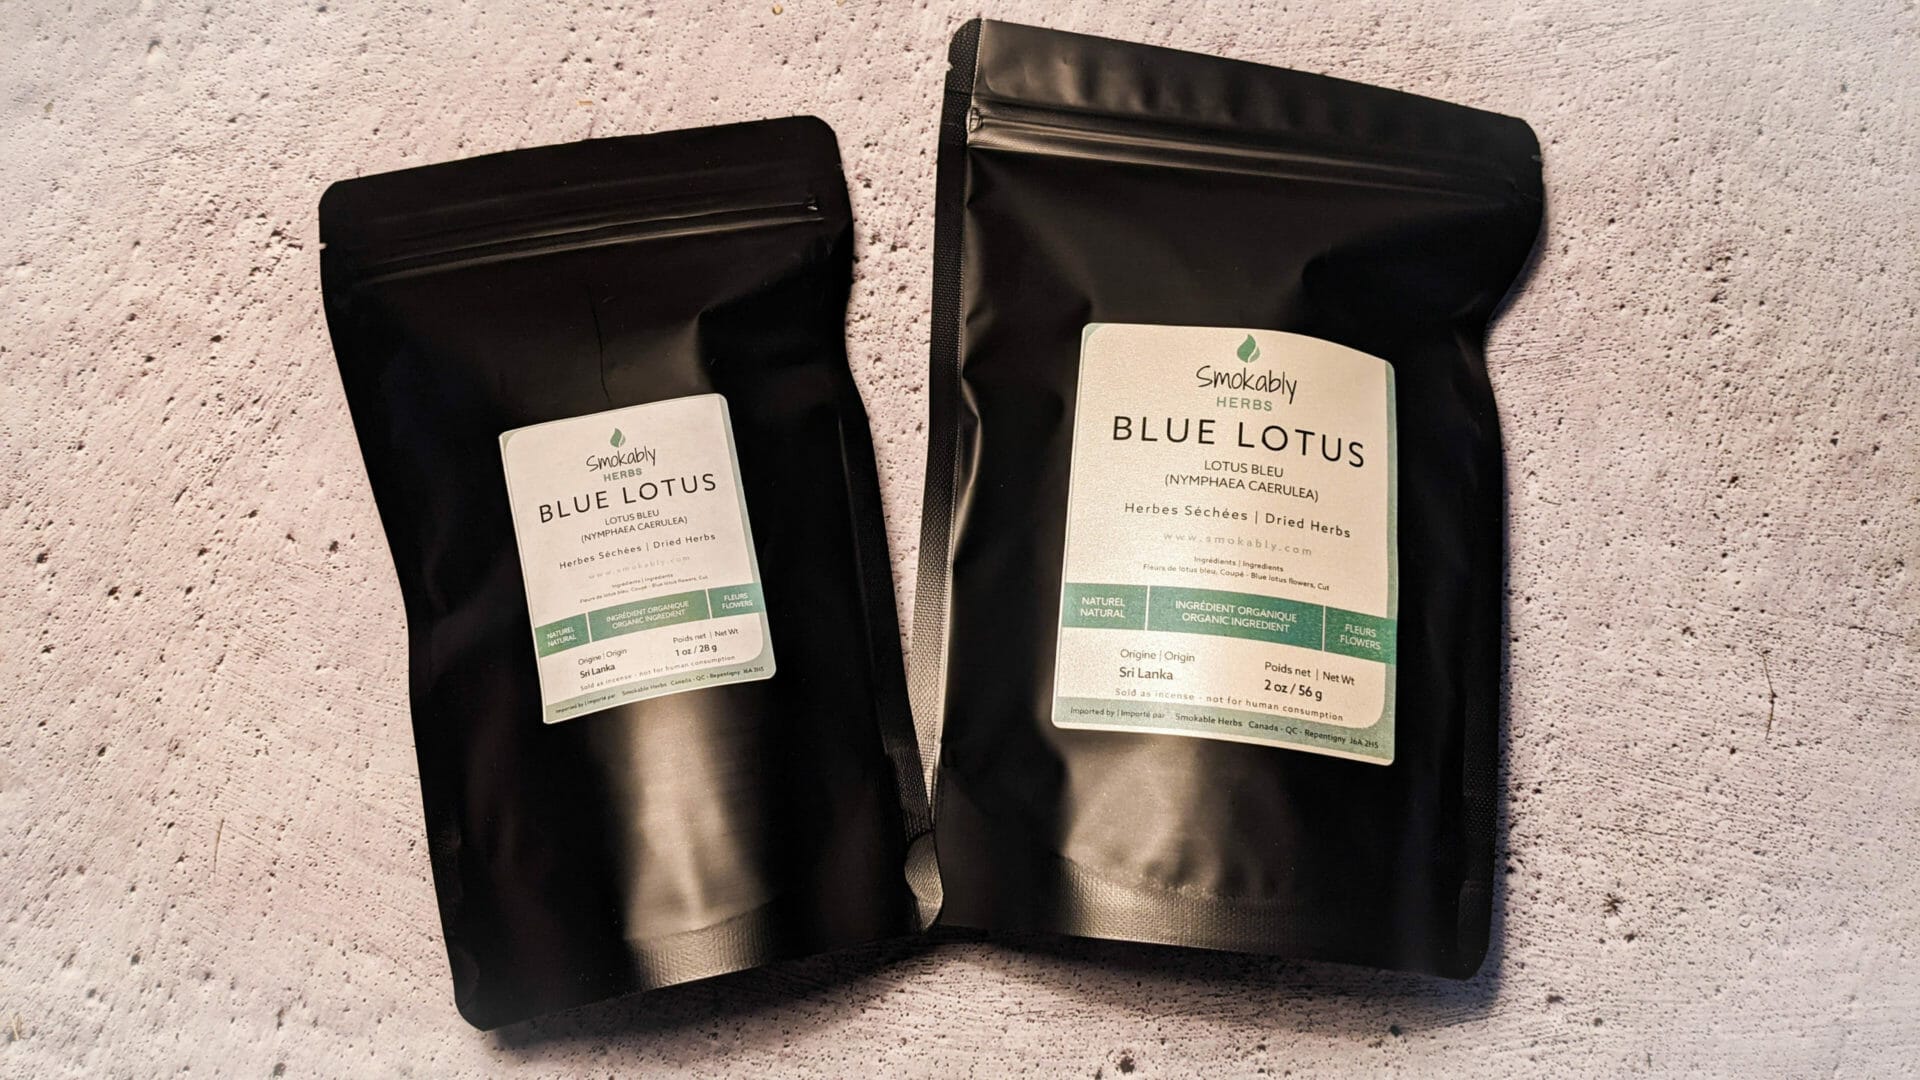 Buy Blue Lotus  Fast Shipping from Smokably